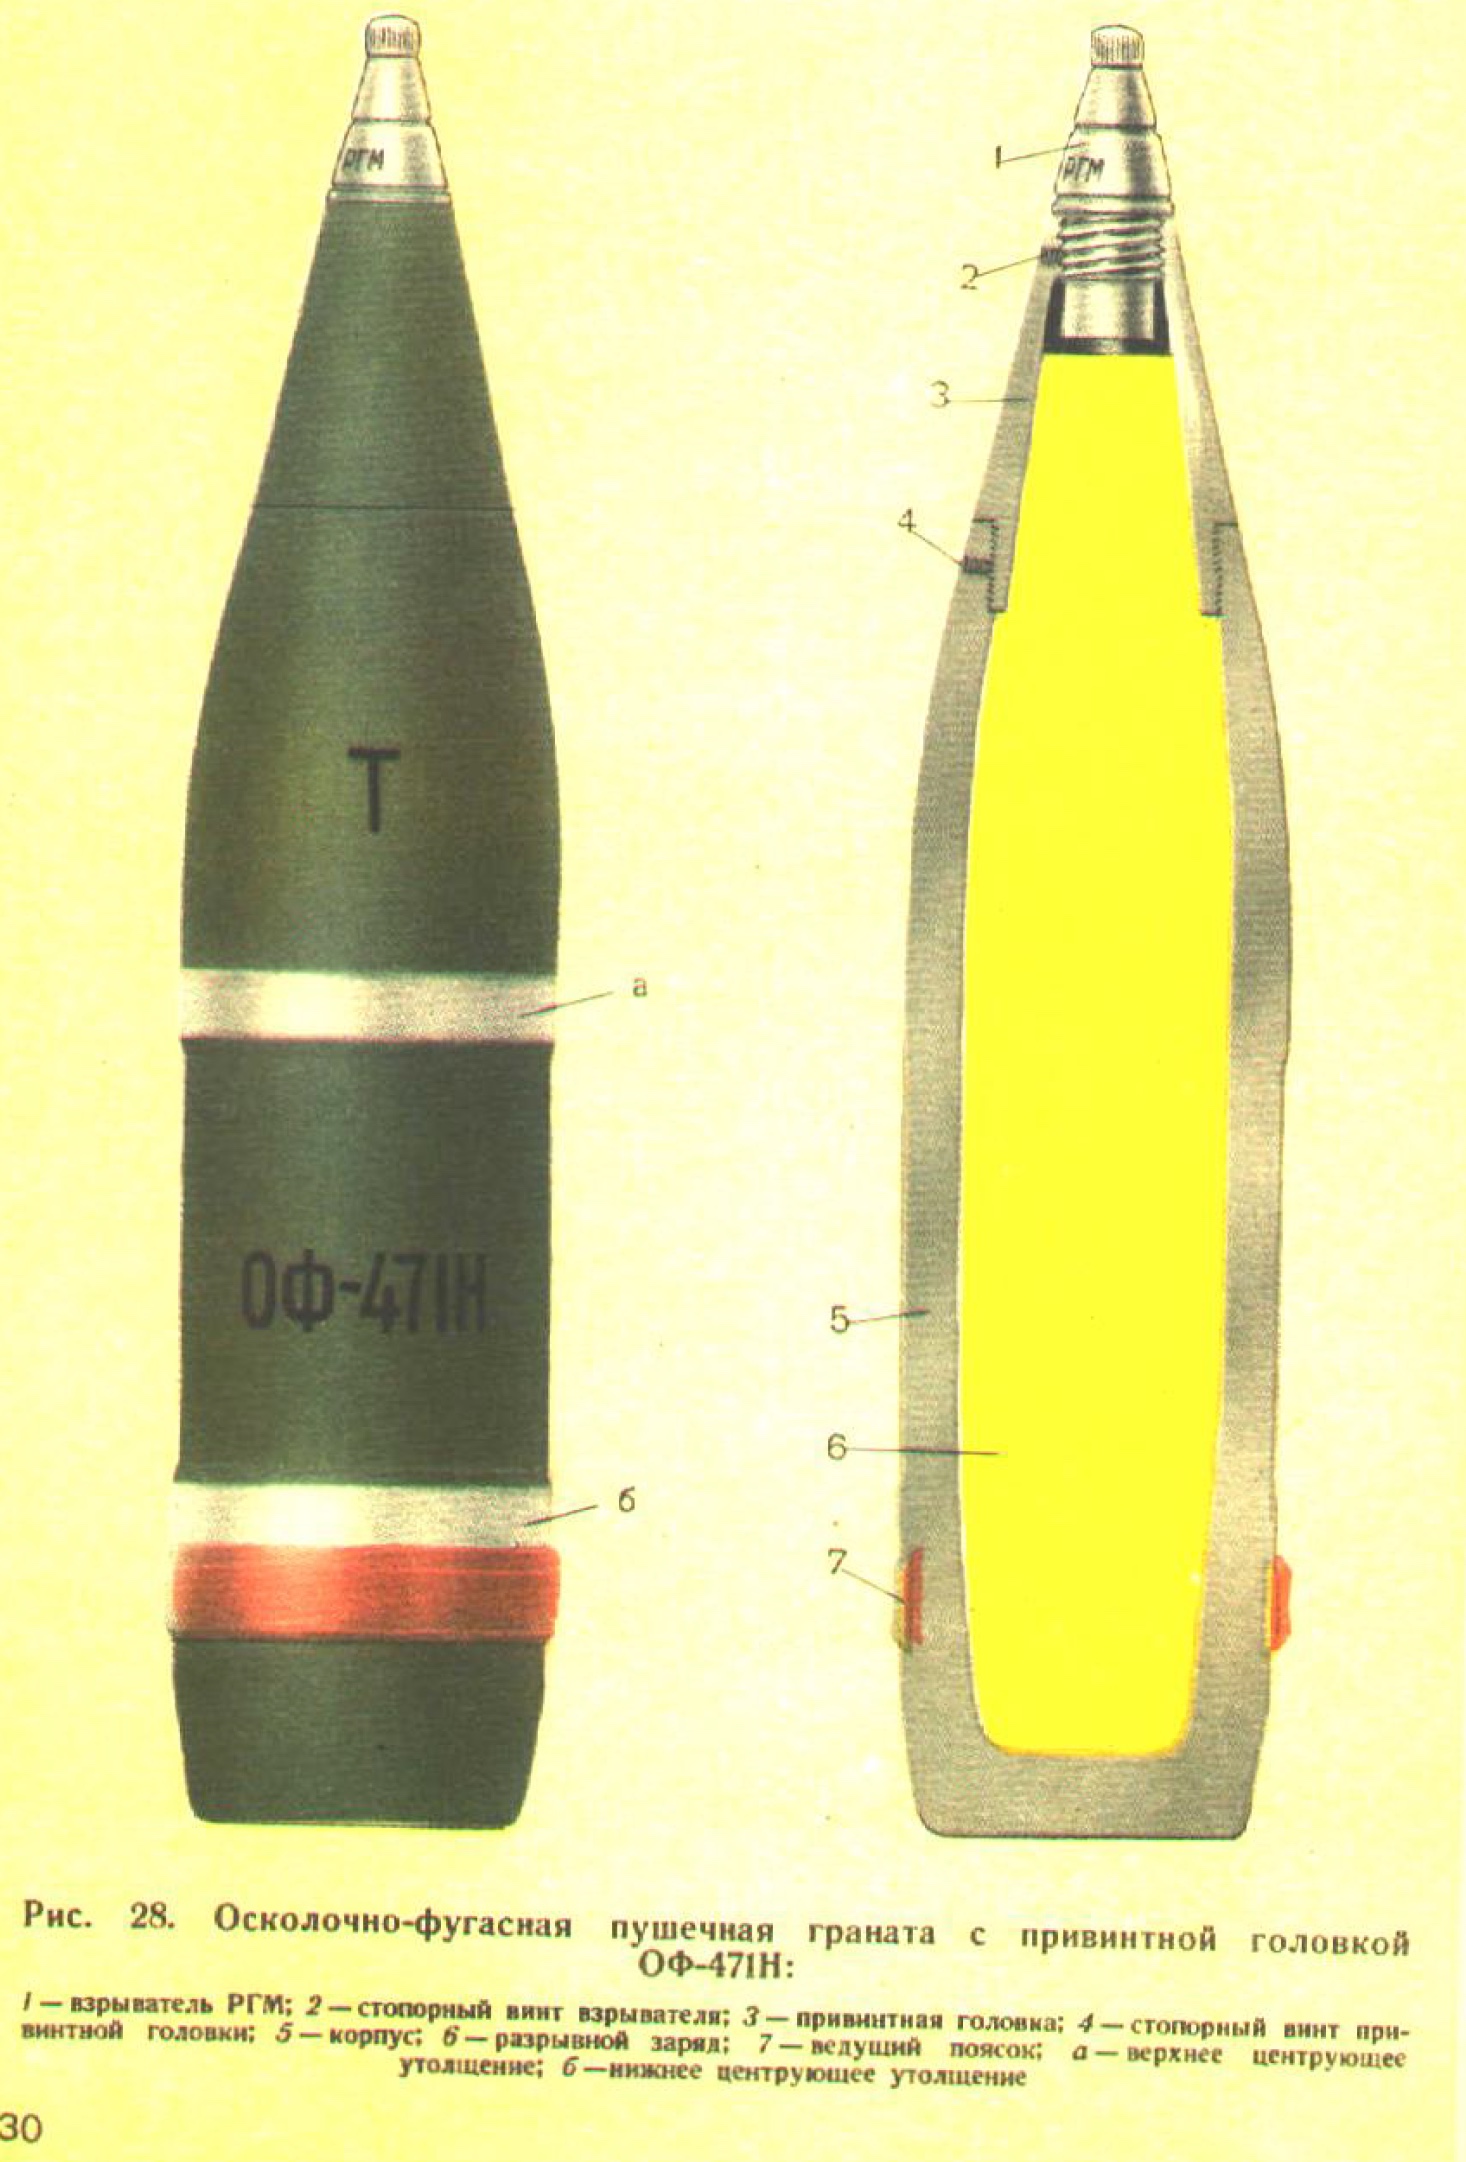 ESERCITO RUSSIA -Russian Artillery Ammunition Extract 1940 (russo) DT - <b>DOWNLOAD</b>